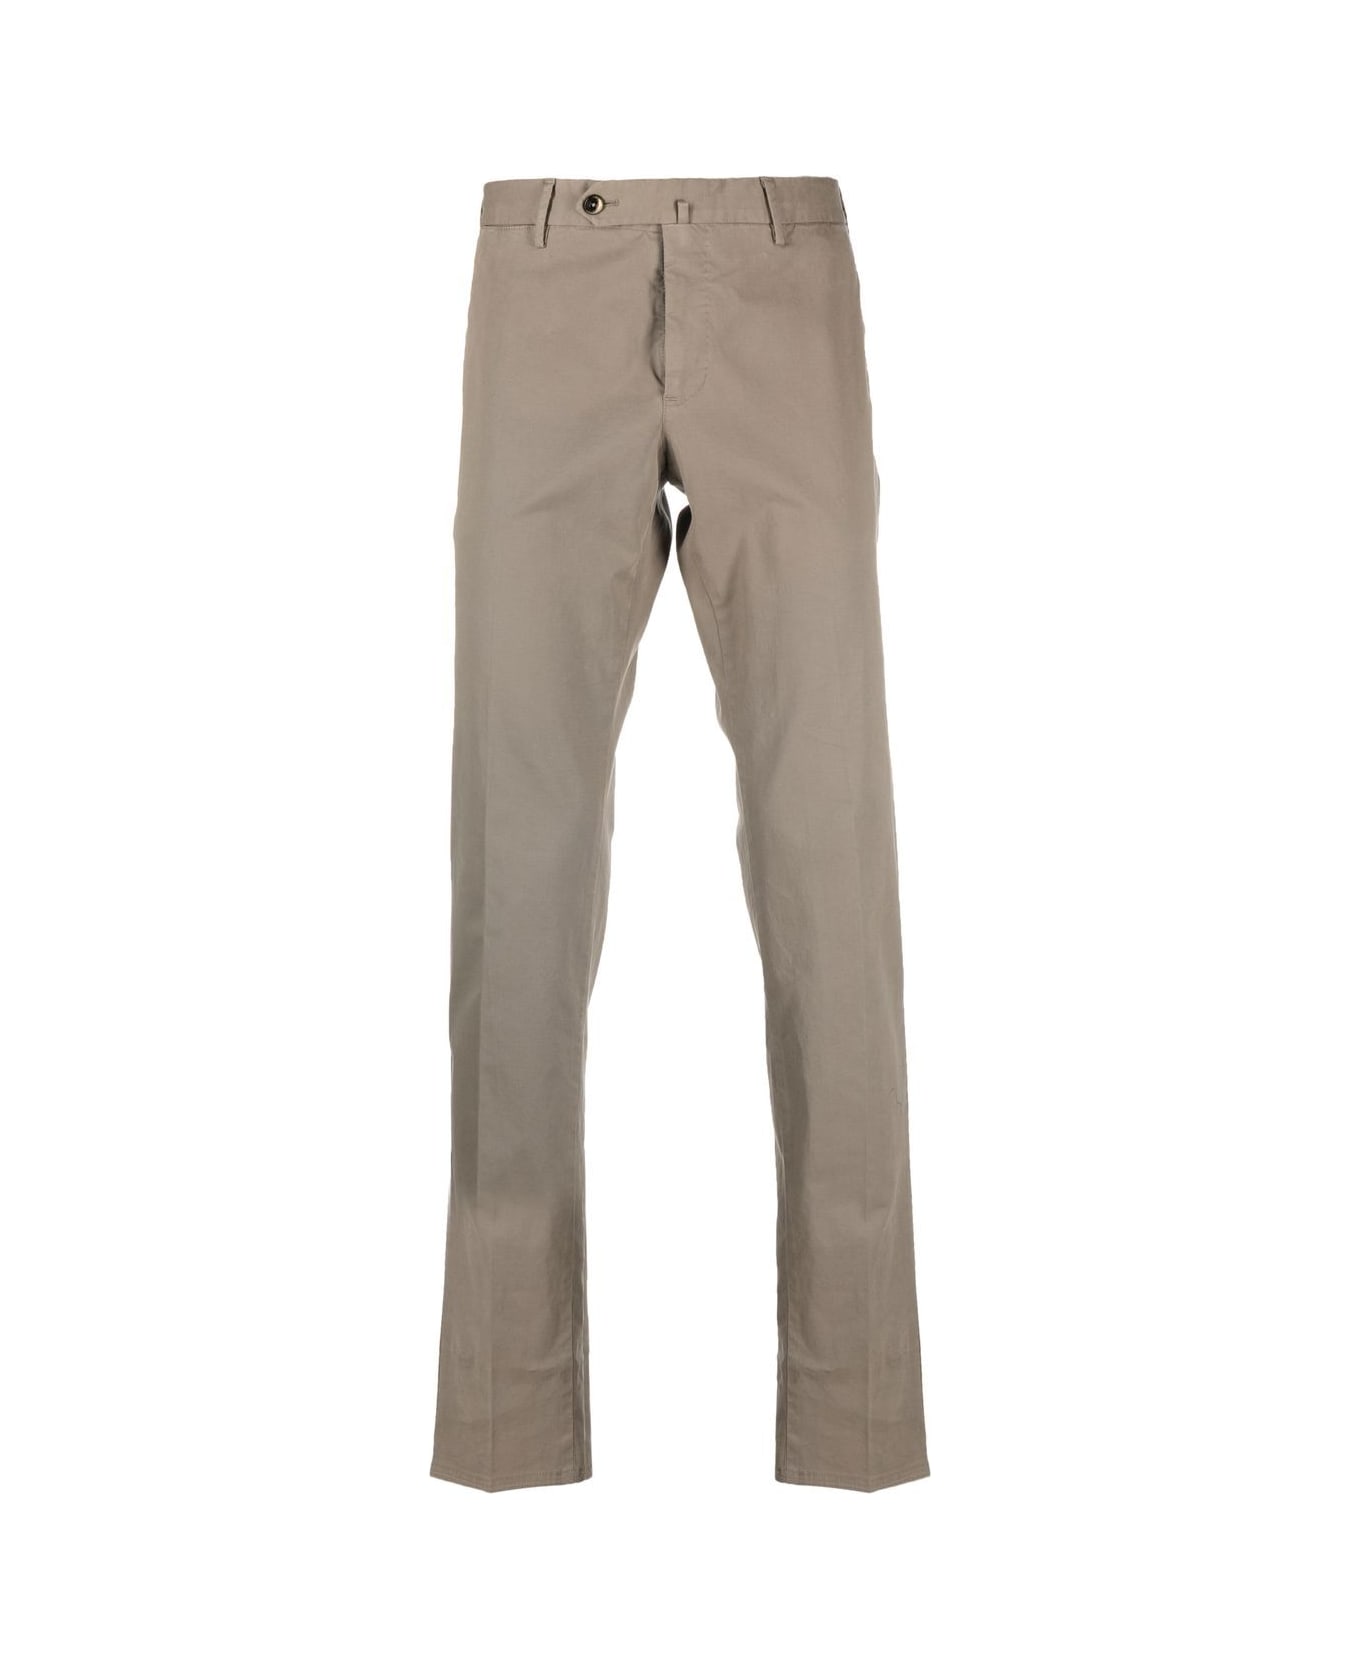 PT Torino Summer Stretch Trousers - Dove Grey